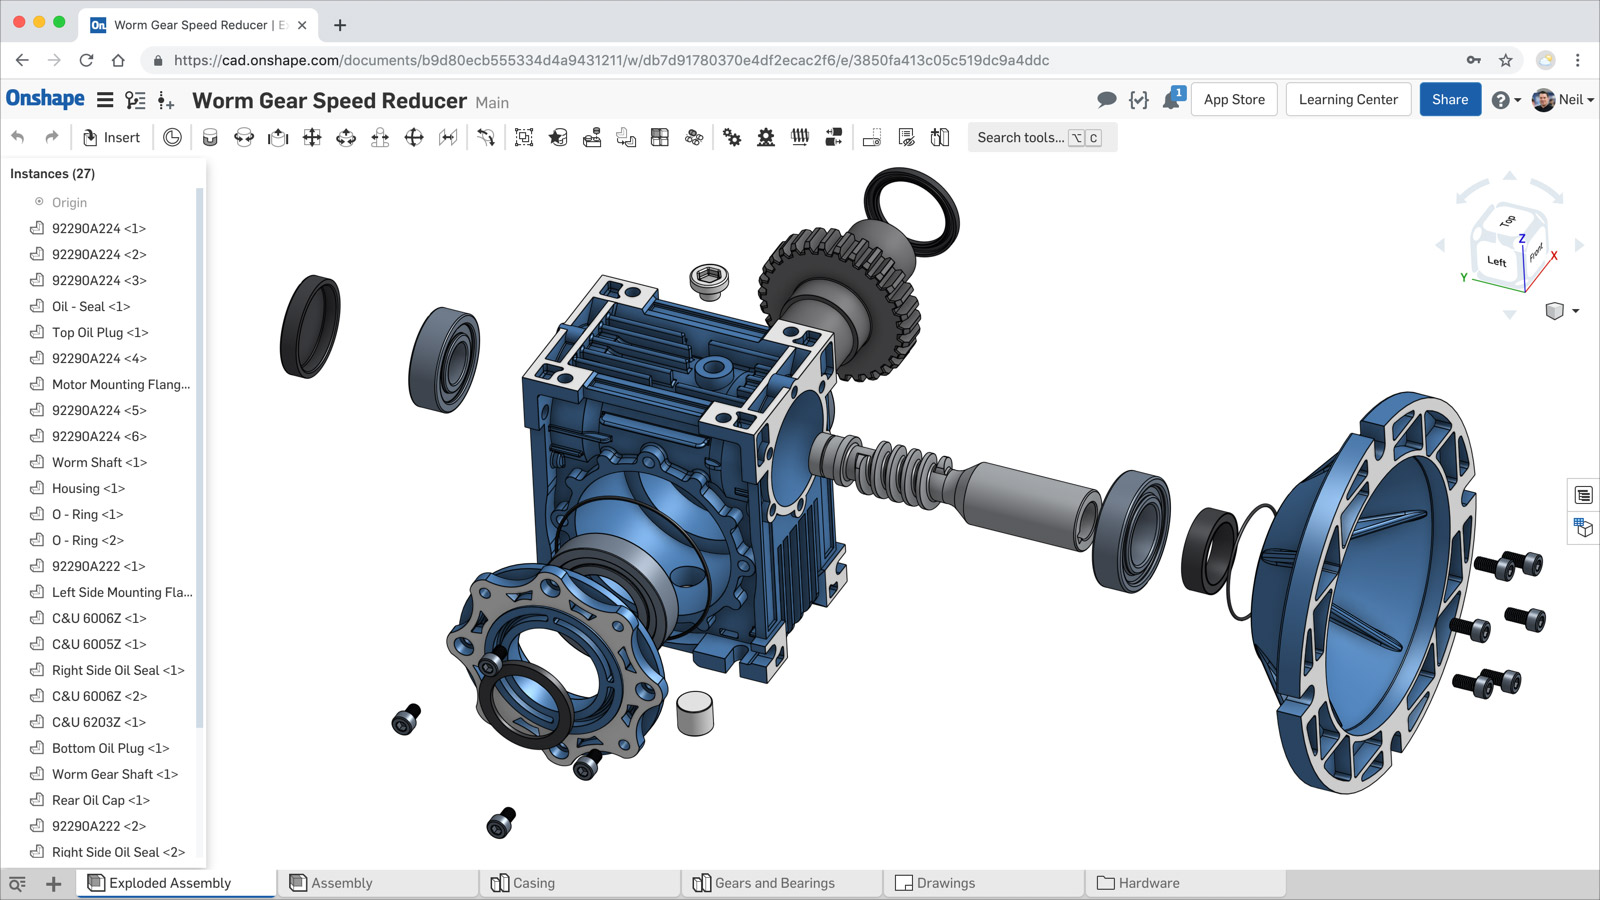 Screenshot of an exploded assembly in the Onshape product design platform.